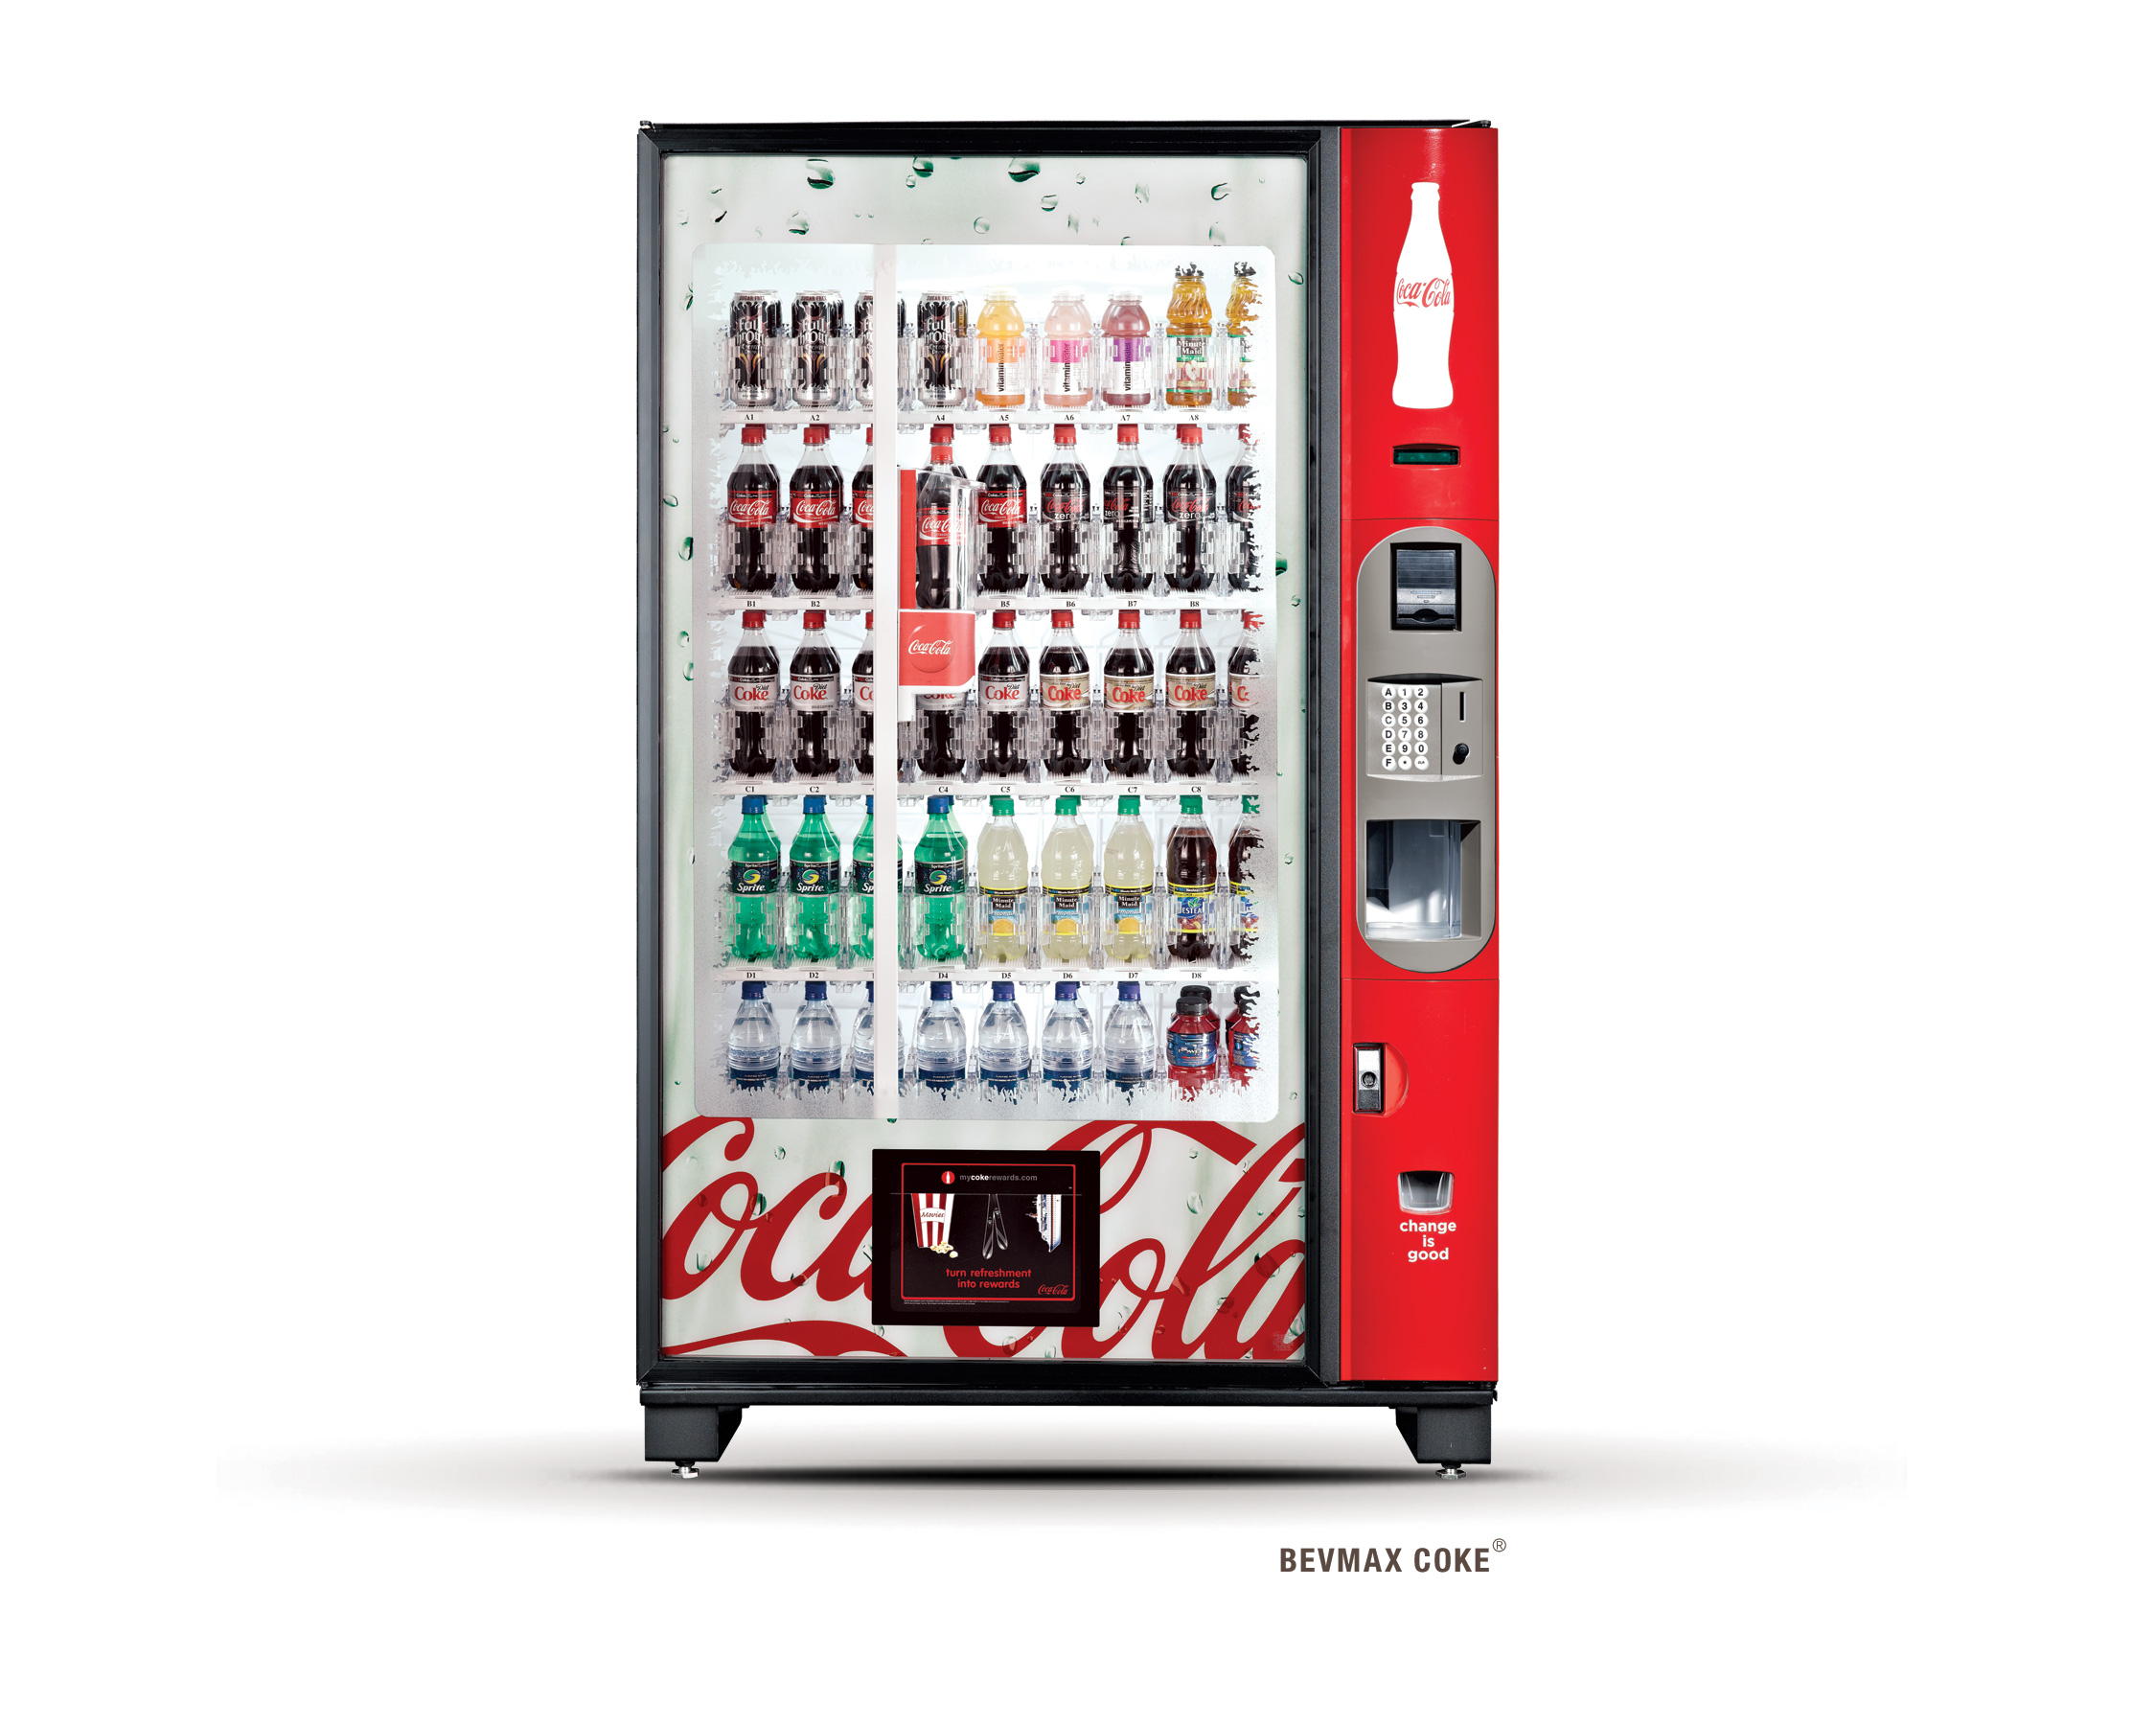 The Most Popular Items to Stock in a Vending Machine